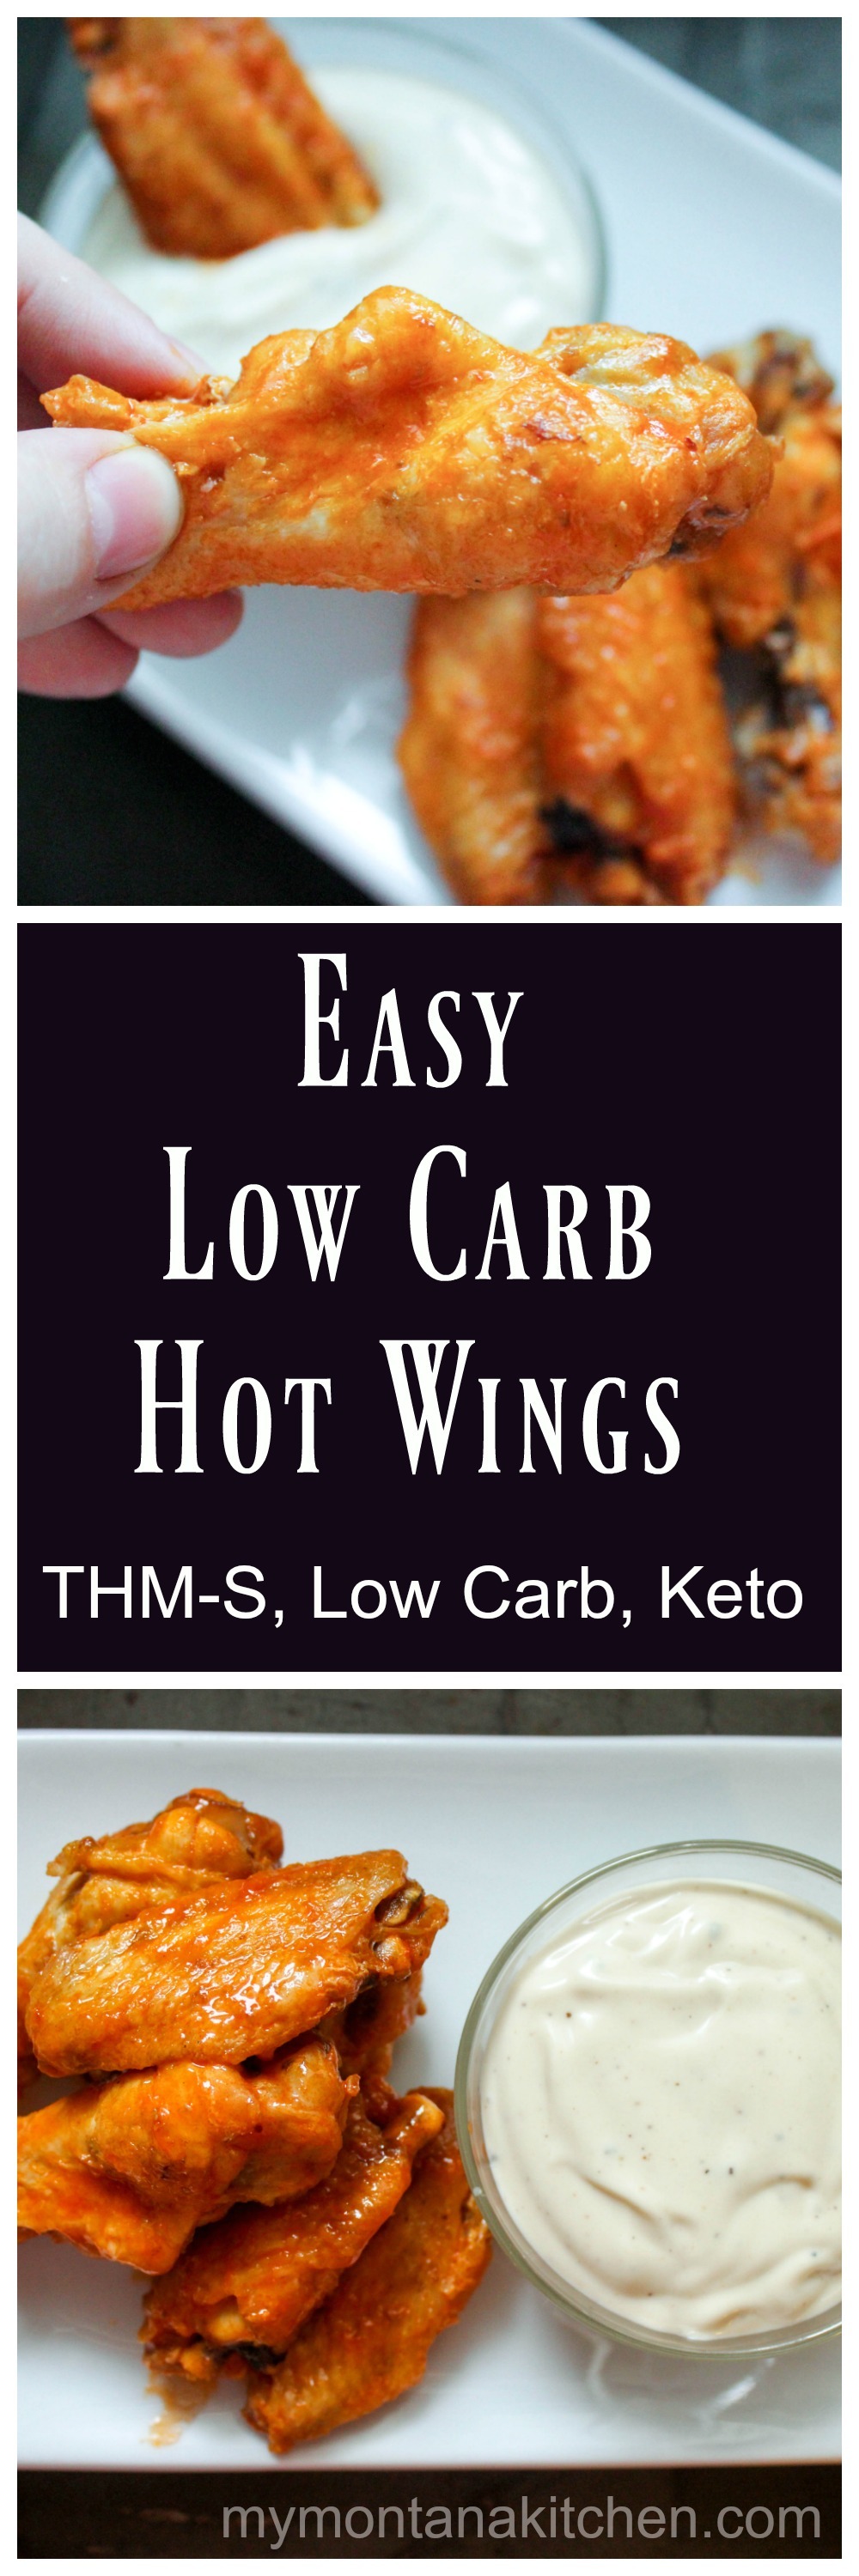 Easy Low Carb Hot Wings (THM-S)